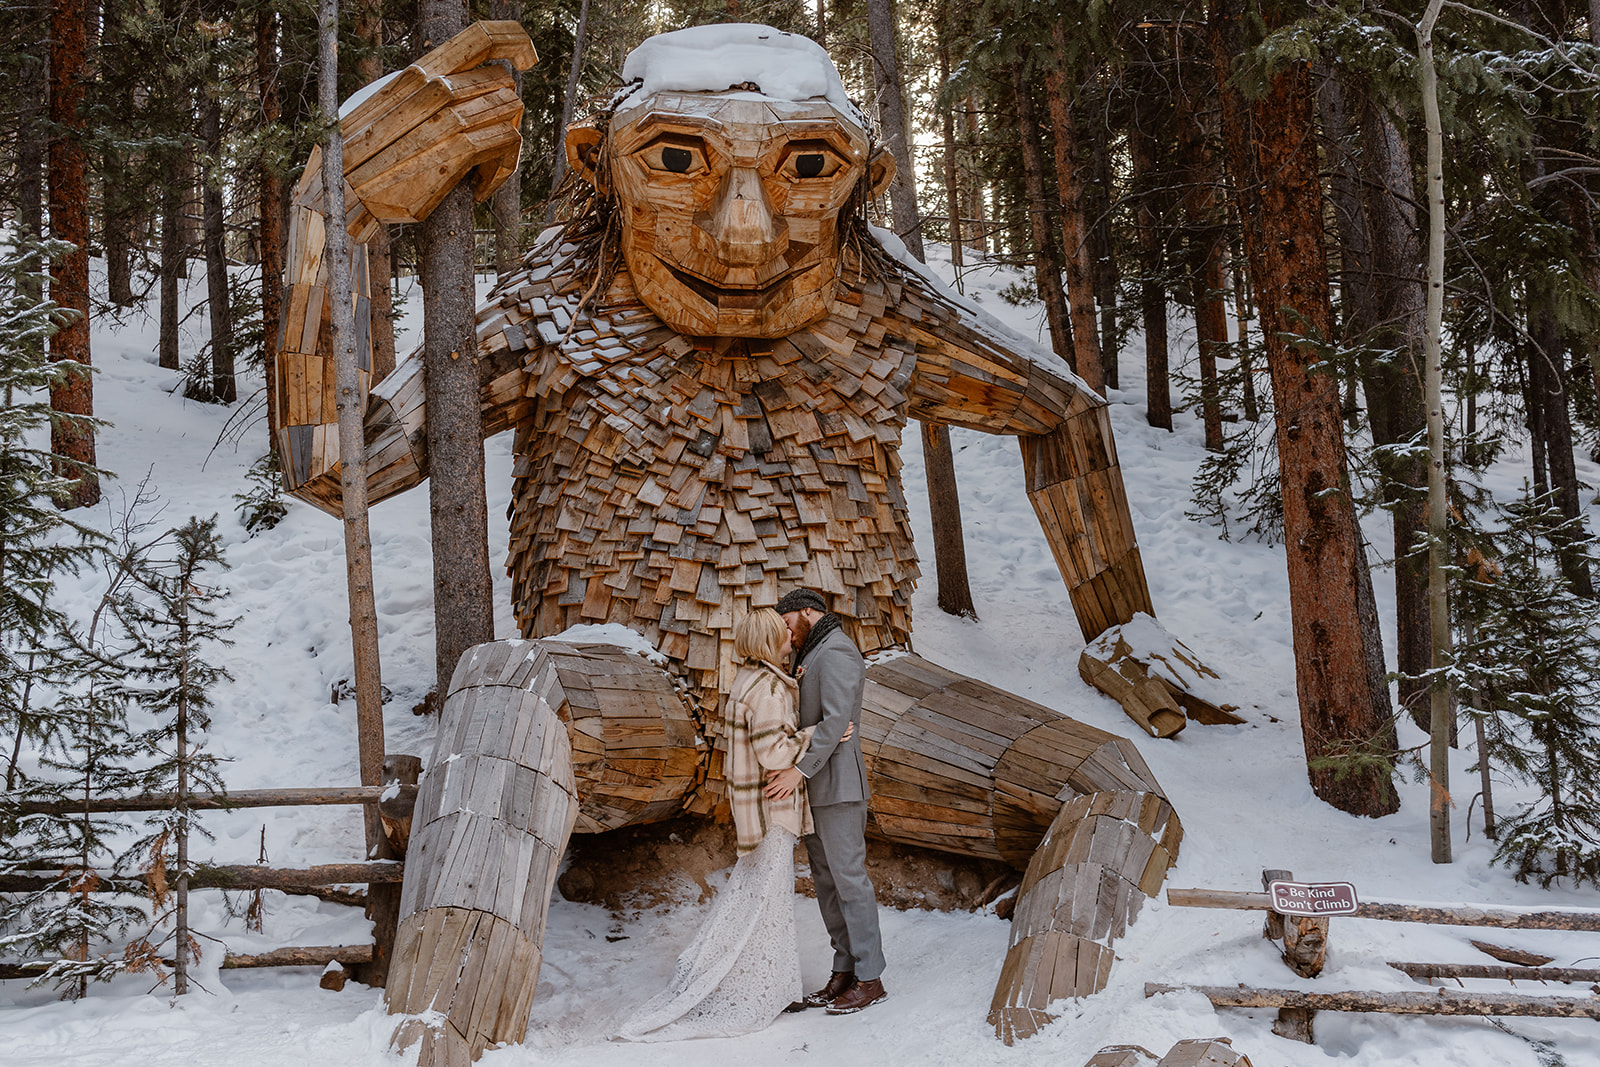 This young couple poses in front of a troll statue in Breckenridge, Colorado, one of the stops they made during their ice skating elopement.